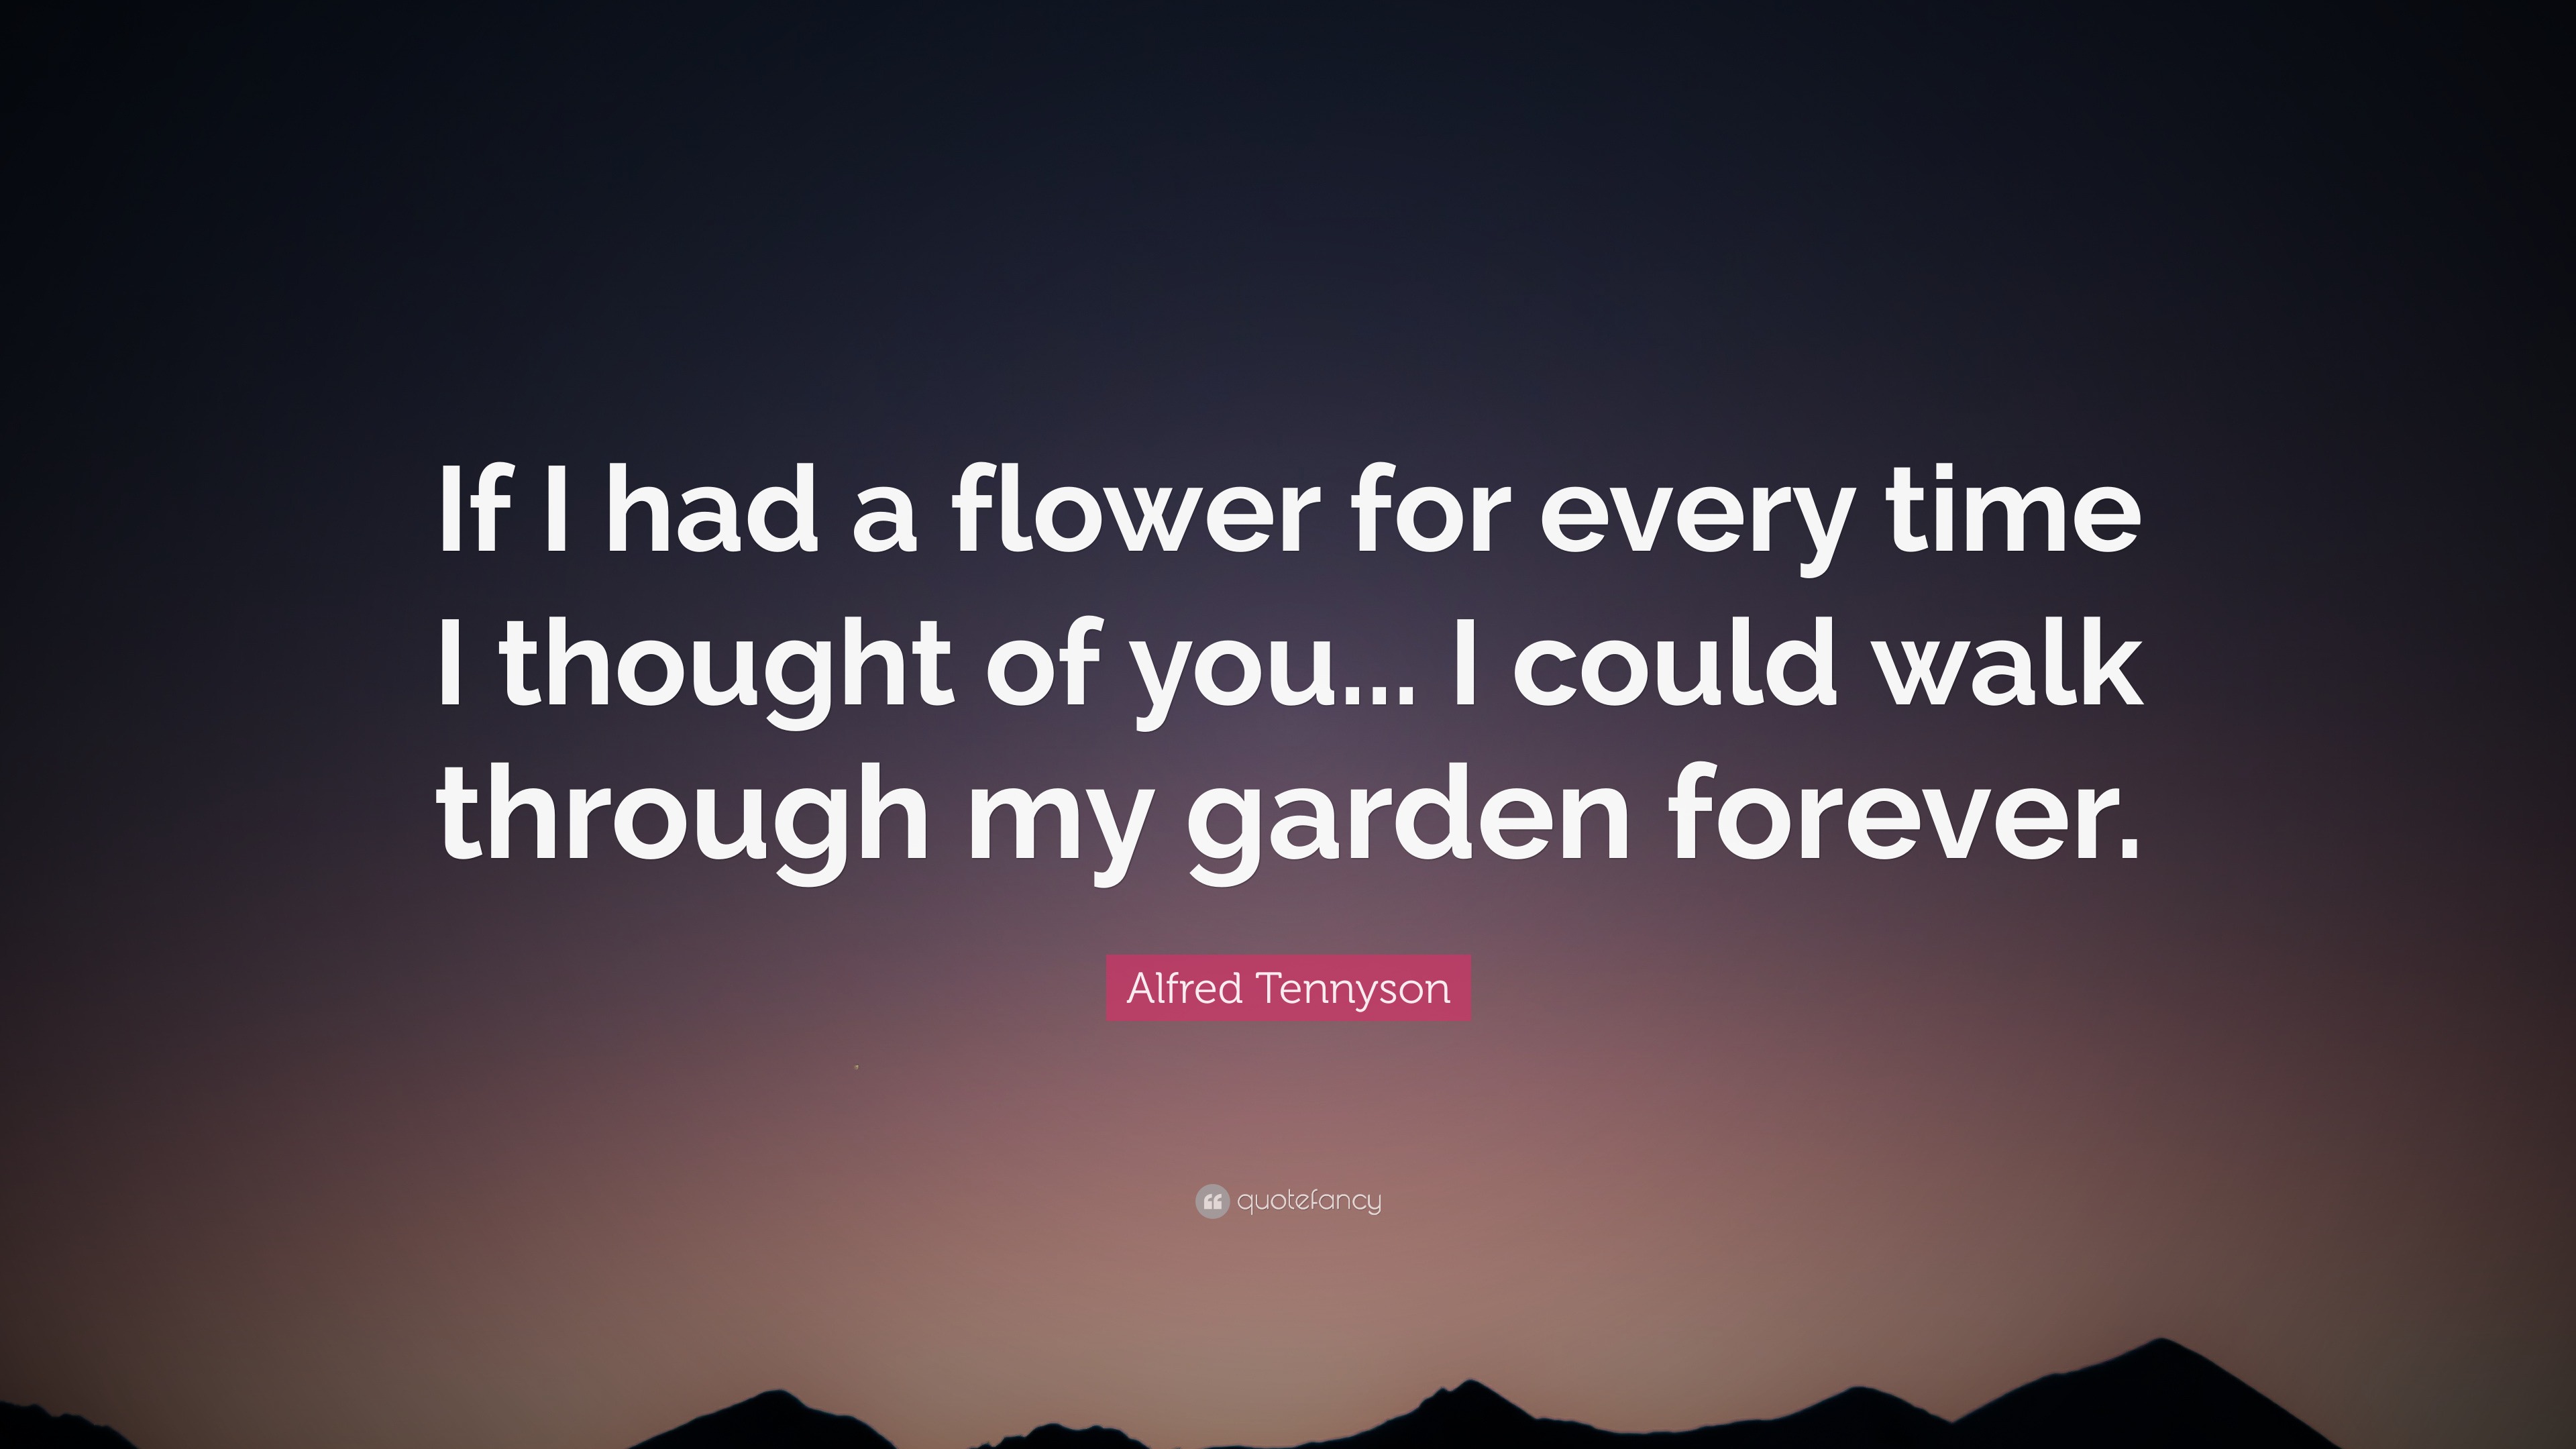 Alfred Tennyson Quote: “If I had a flower for every time I thought of ...